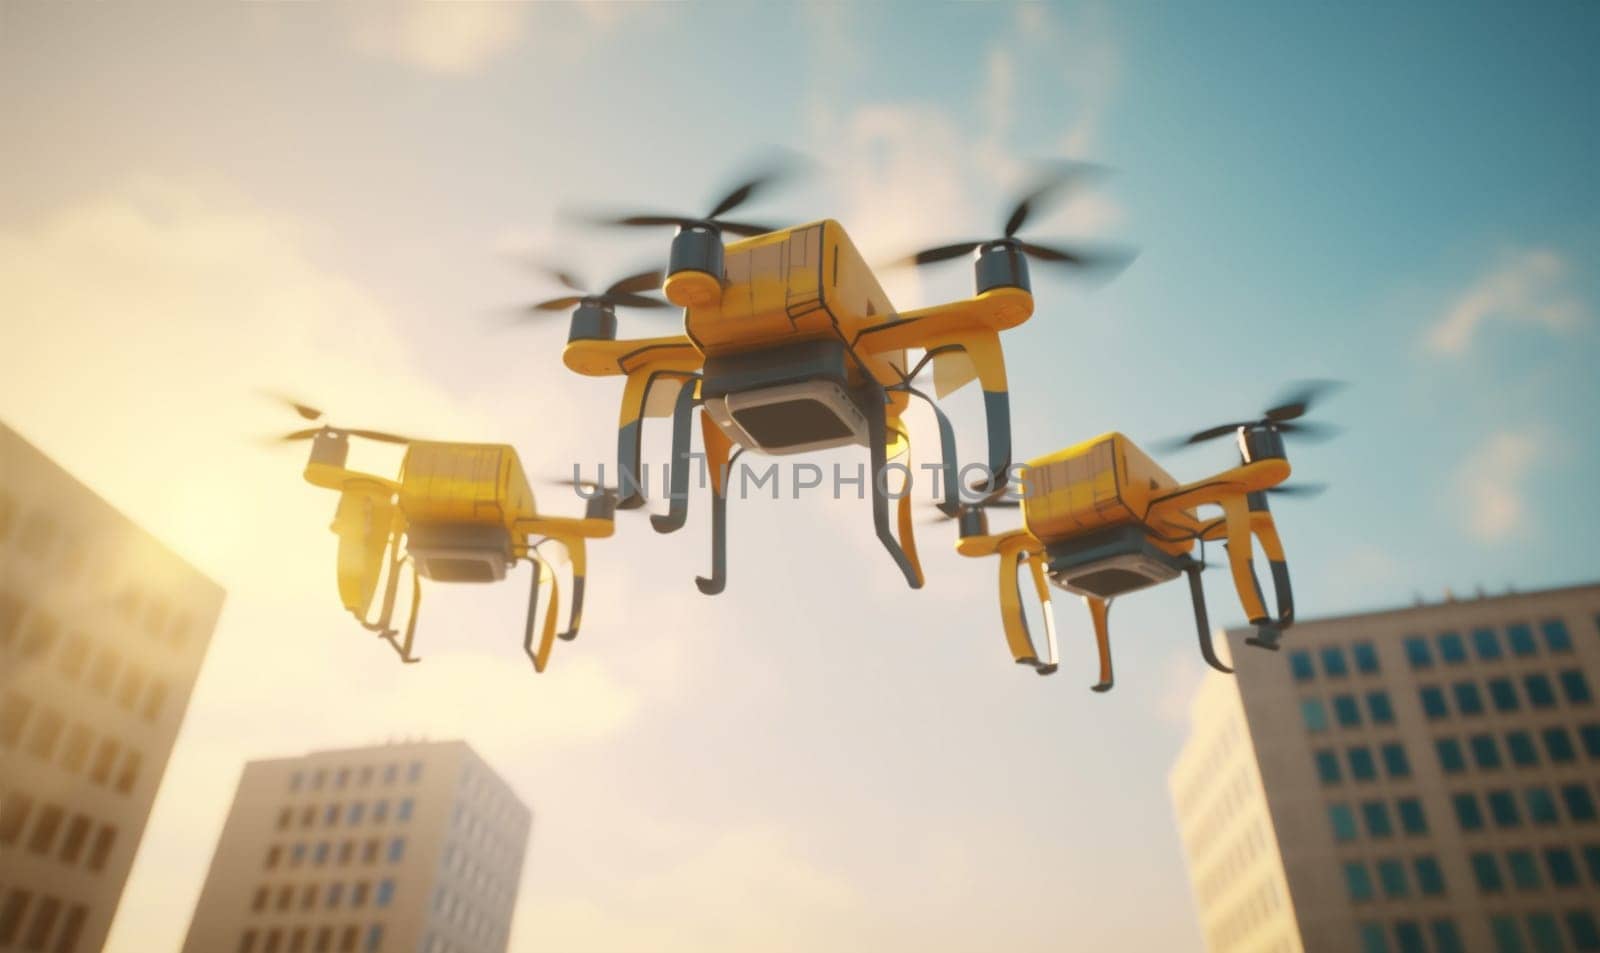 wireless drone express fly package parcel aircraft helicopter blue flight city aerial transport delivery remote service technology fast air cargo. Generative AI.